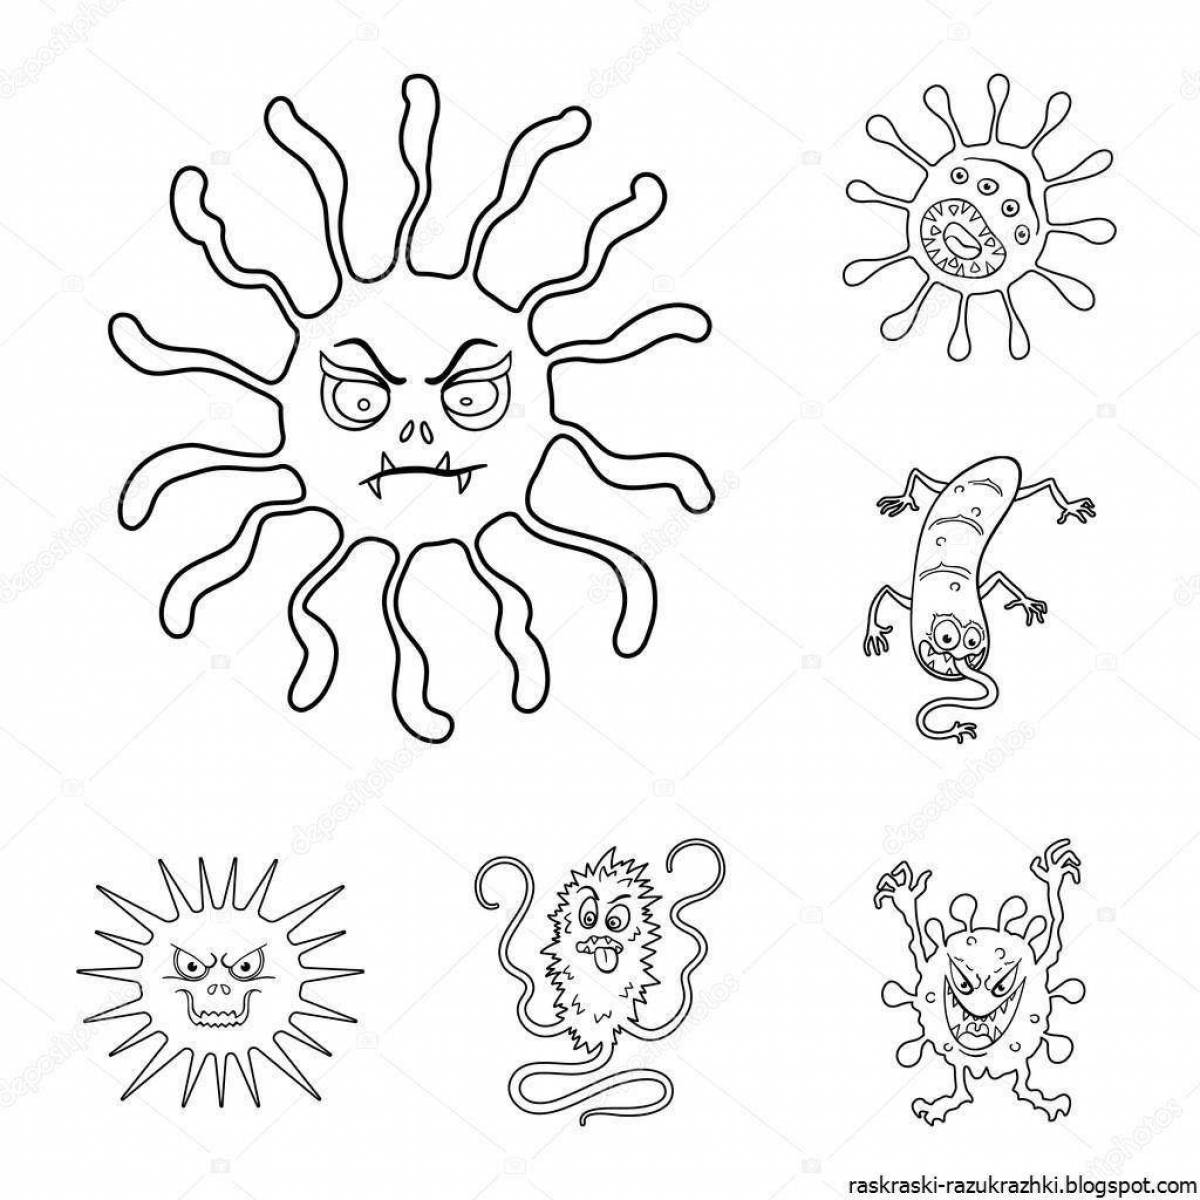 Playful germs and bacteria coloring page